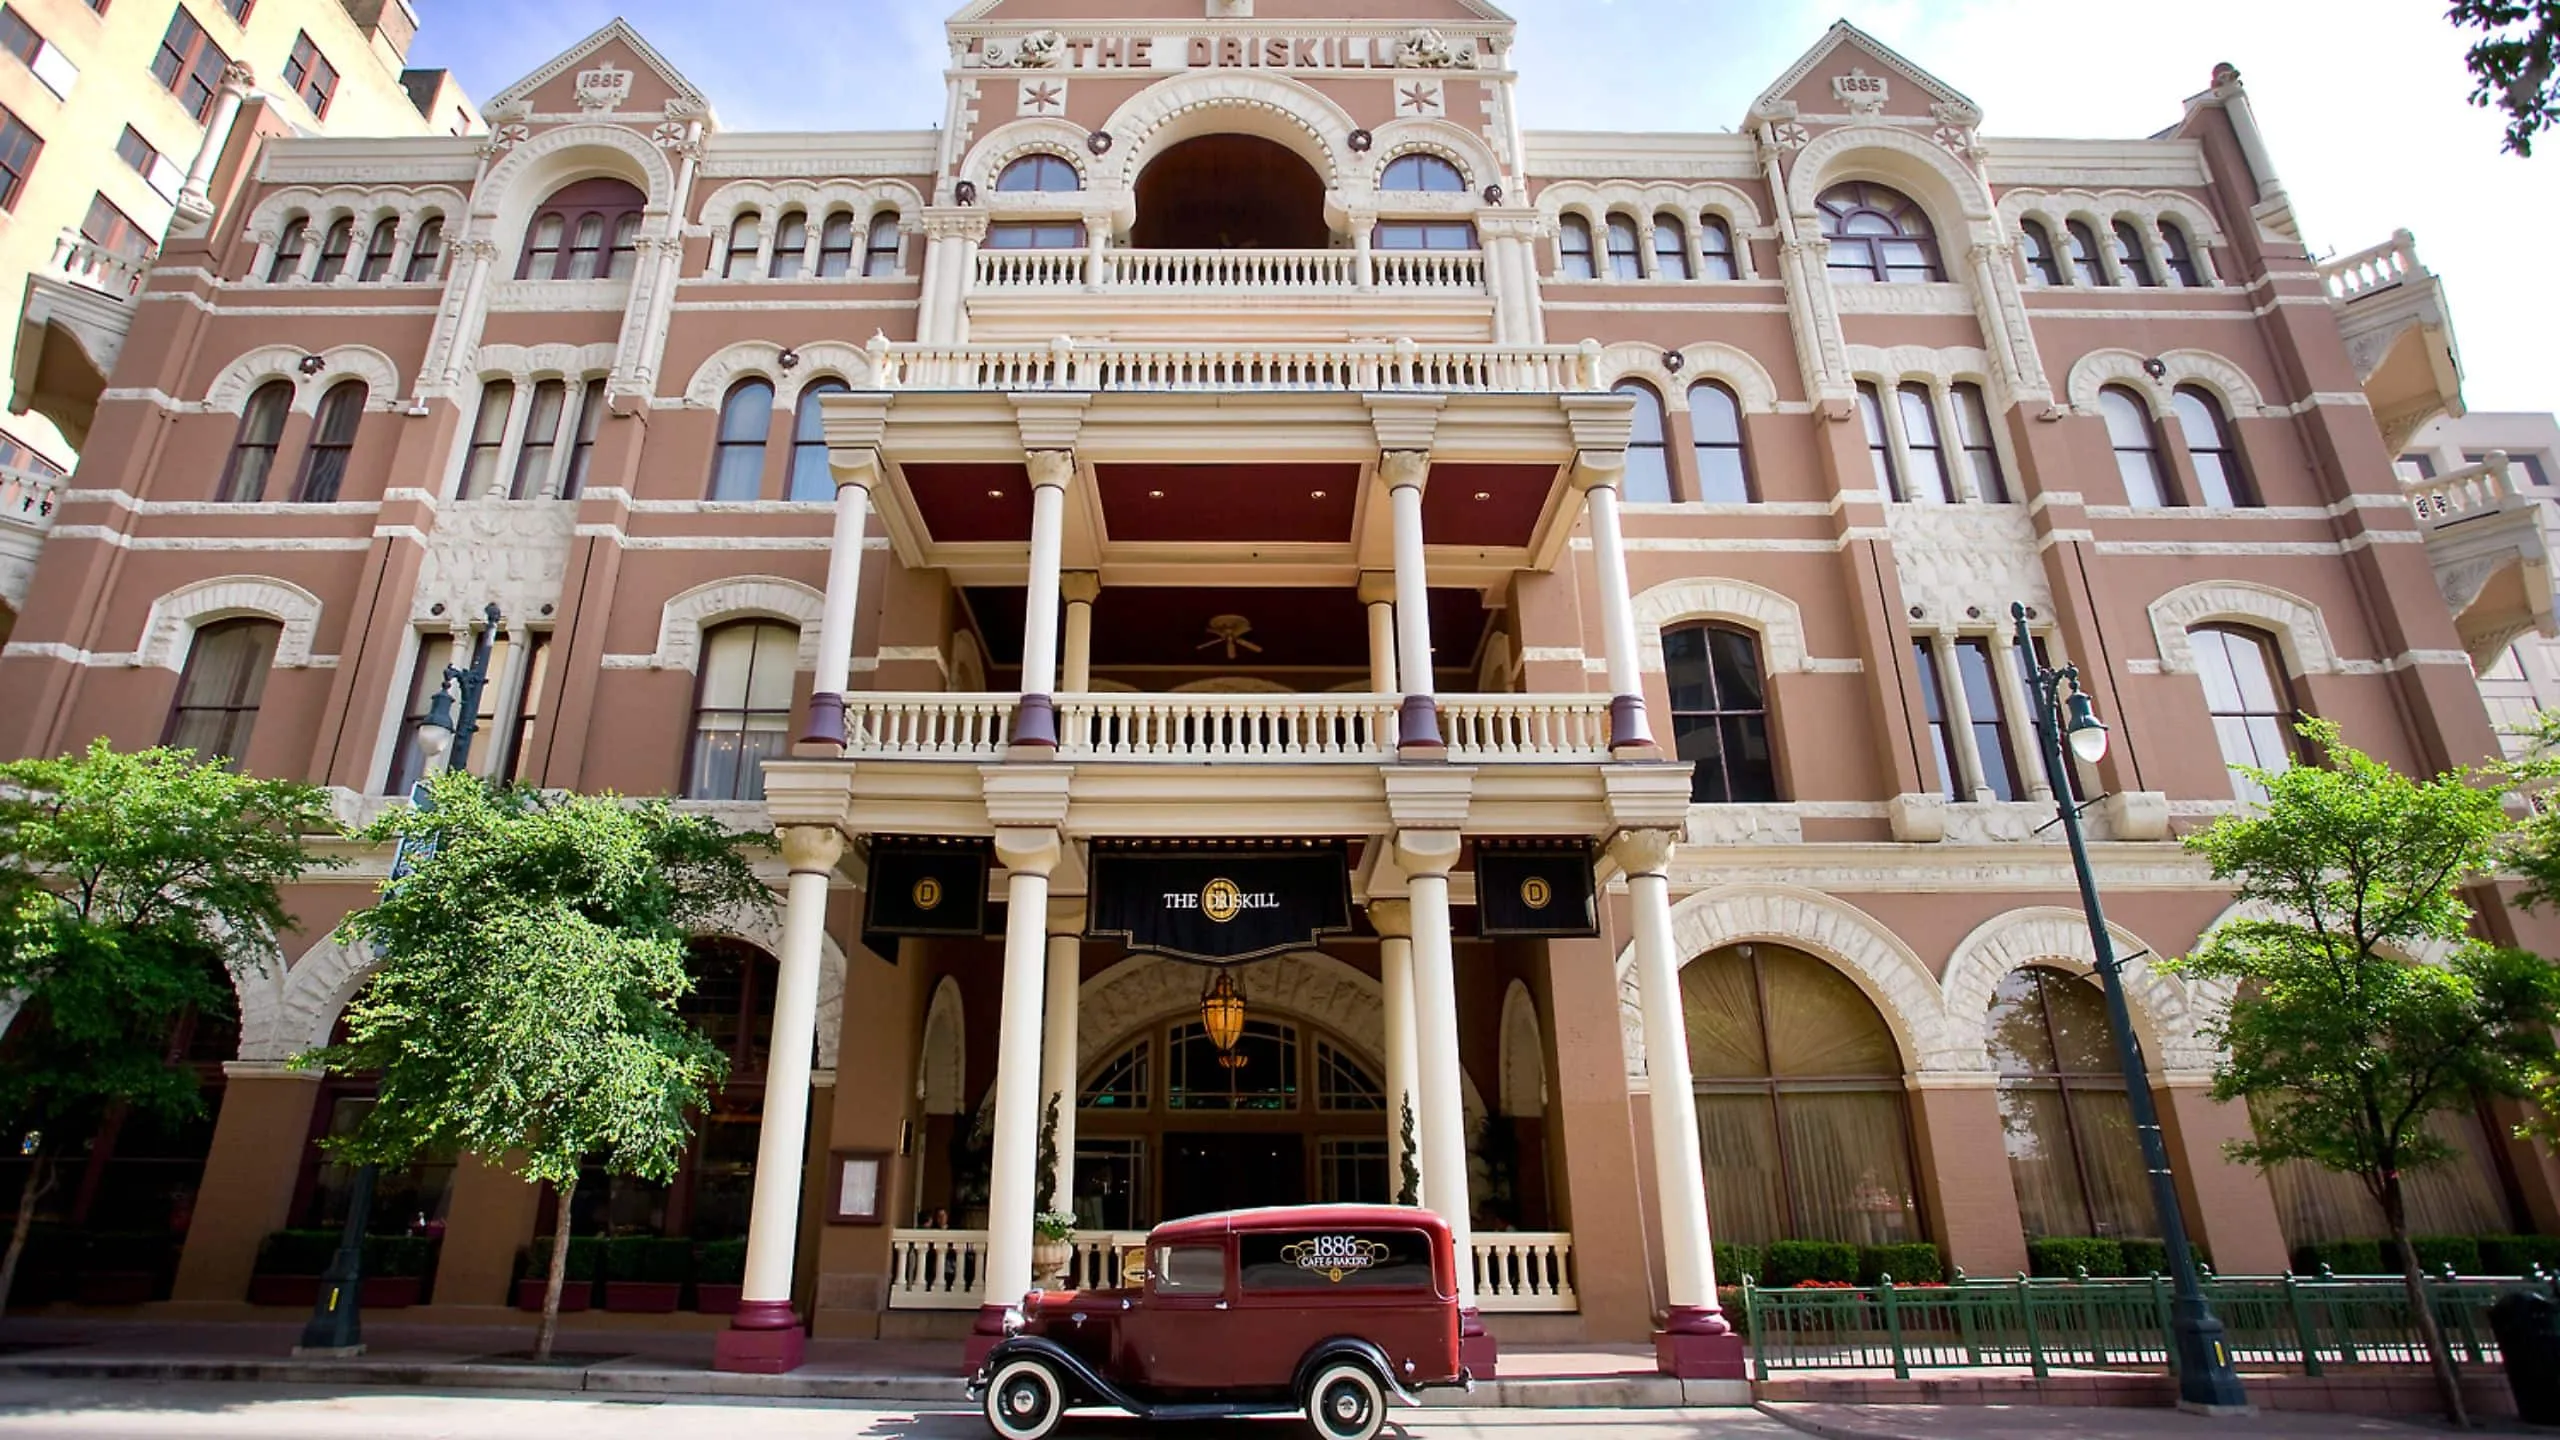 
The-Driskell-Hotel-in-Austin-Texas